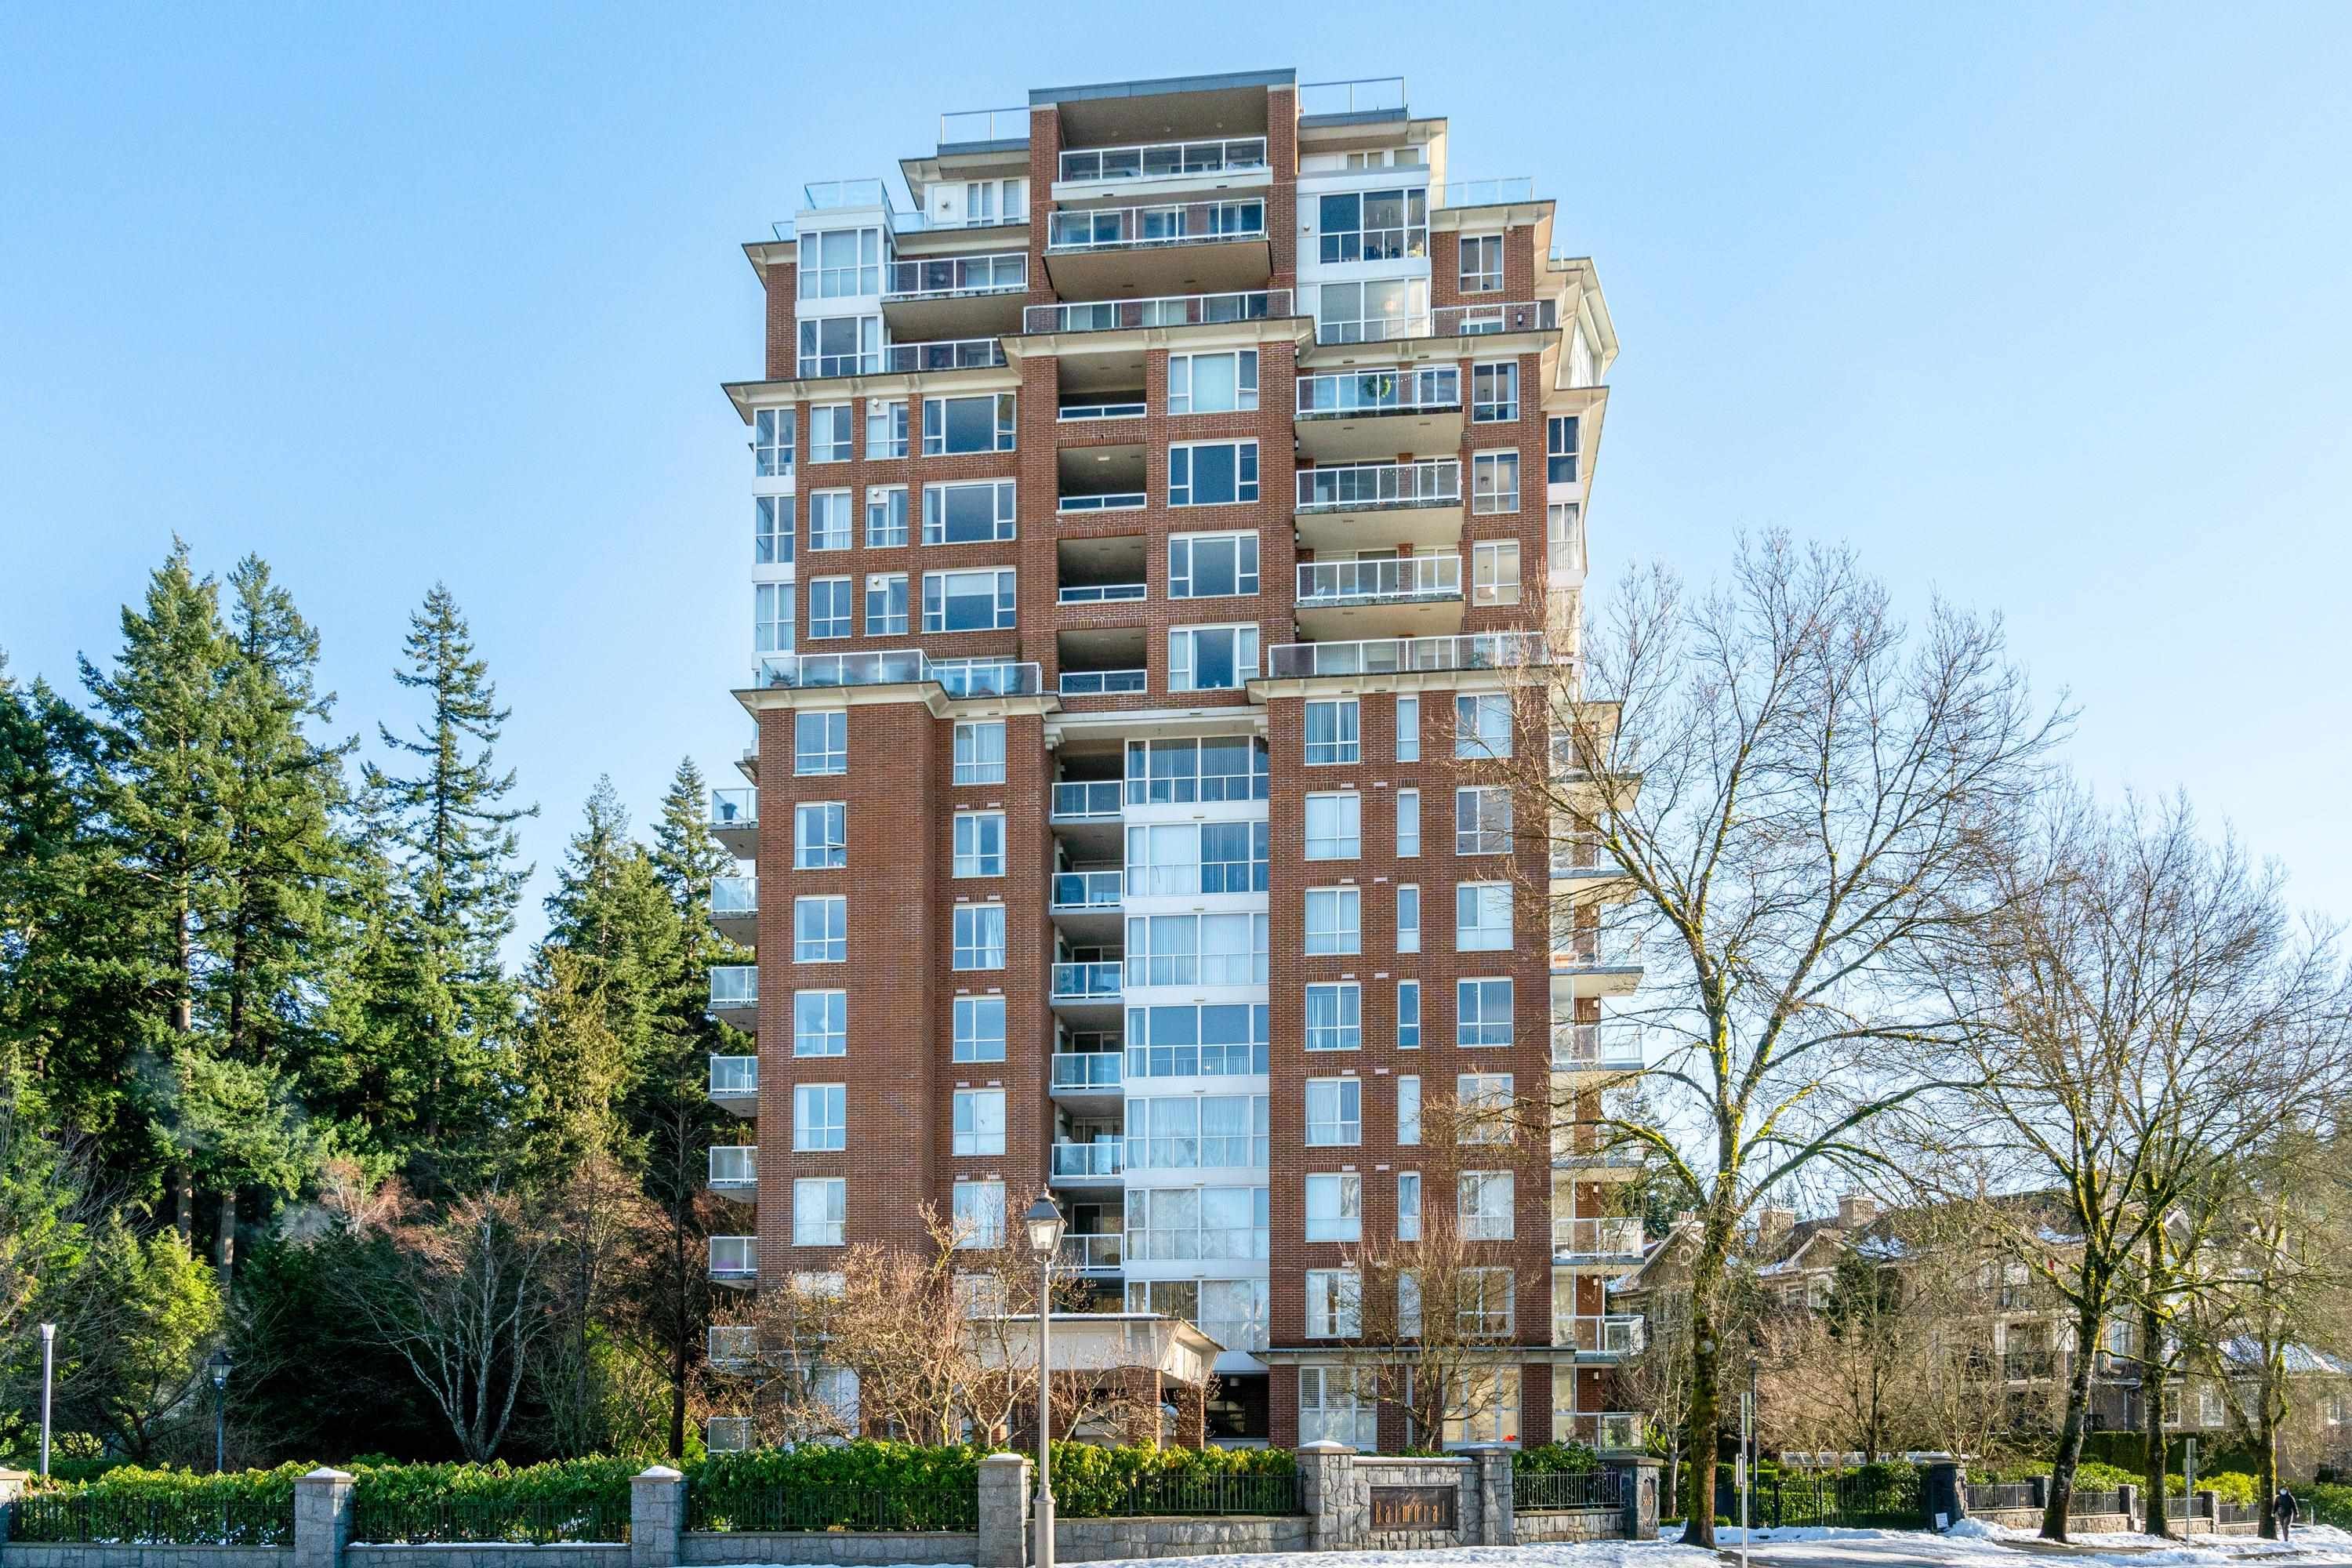 New property listed in University VW, Vancouver West